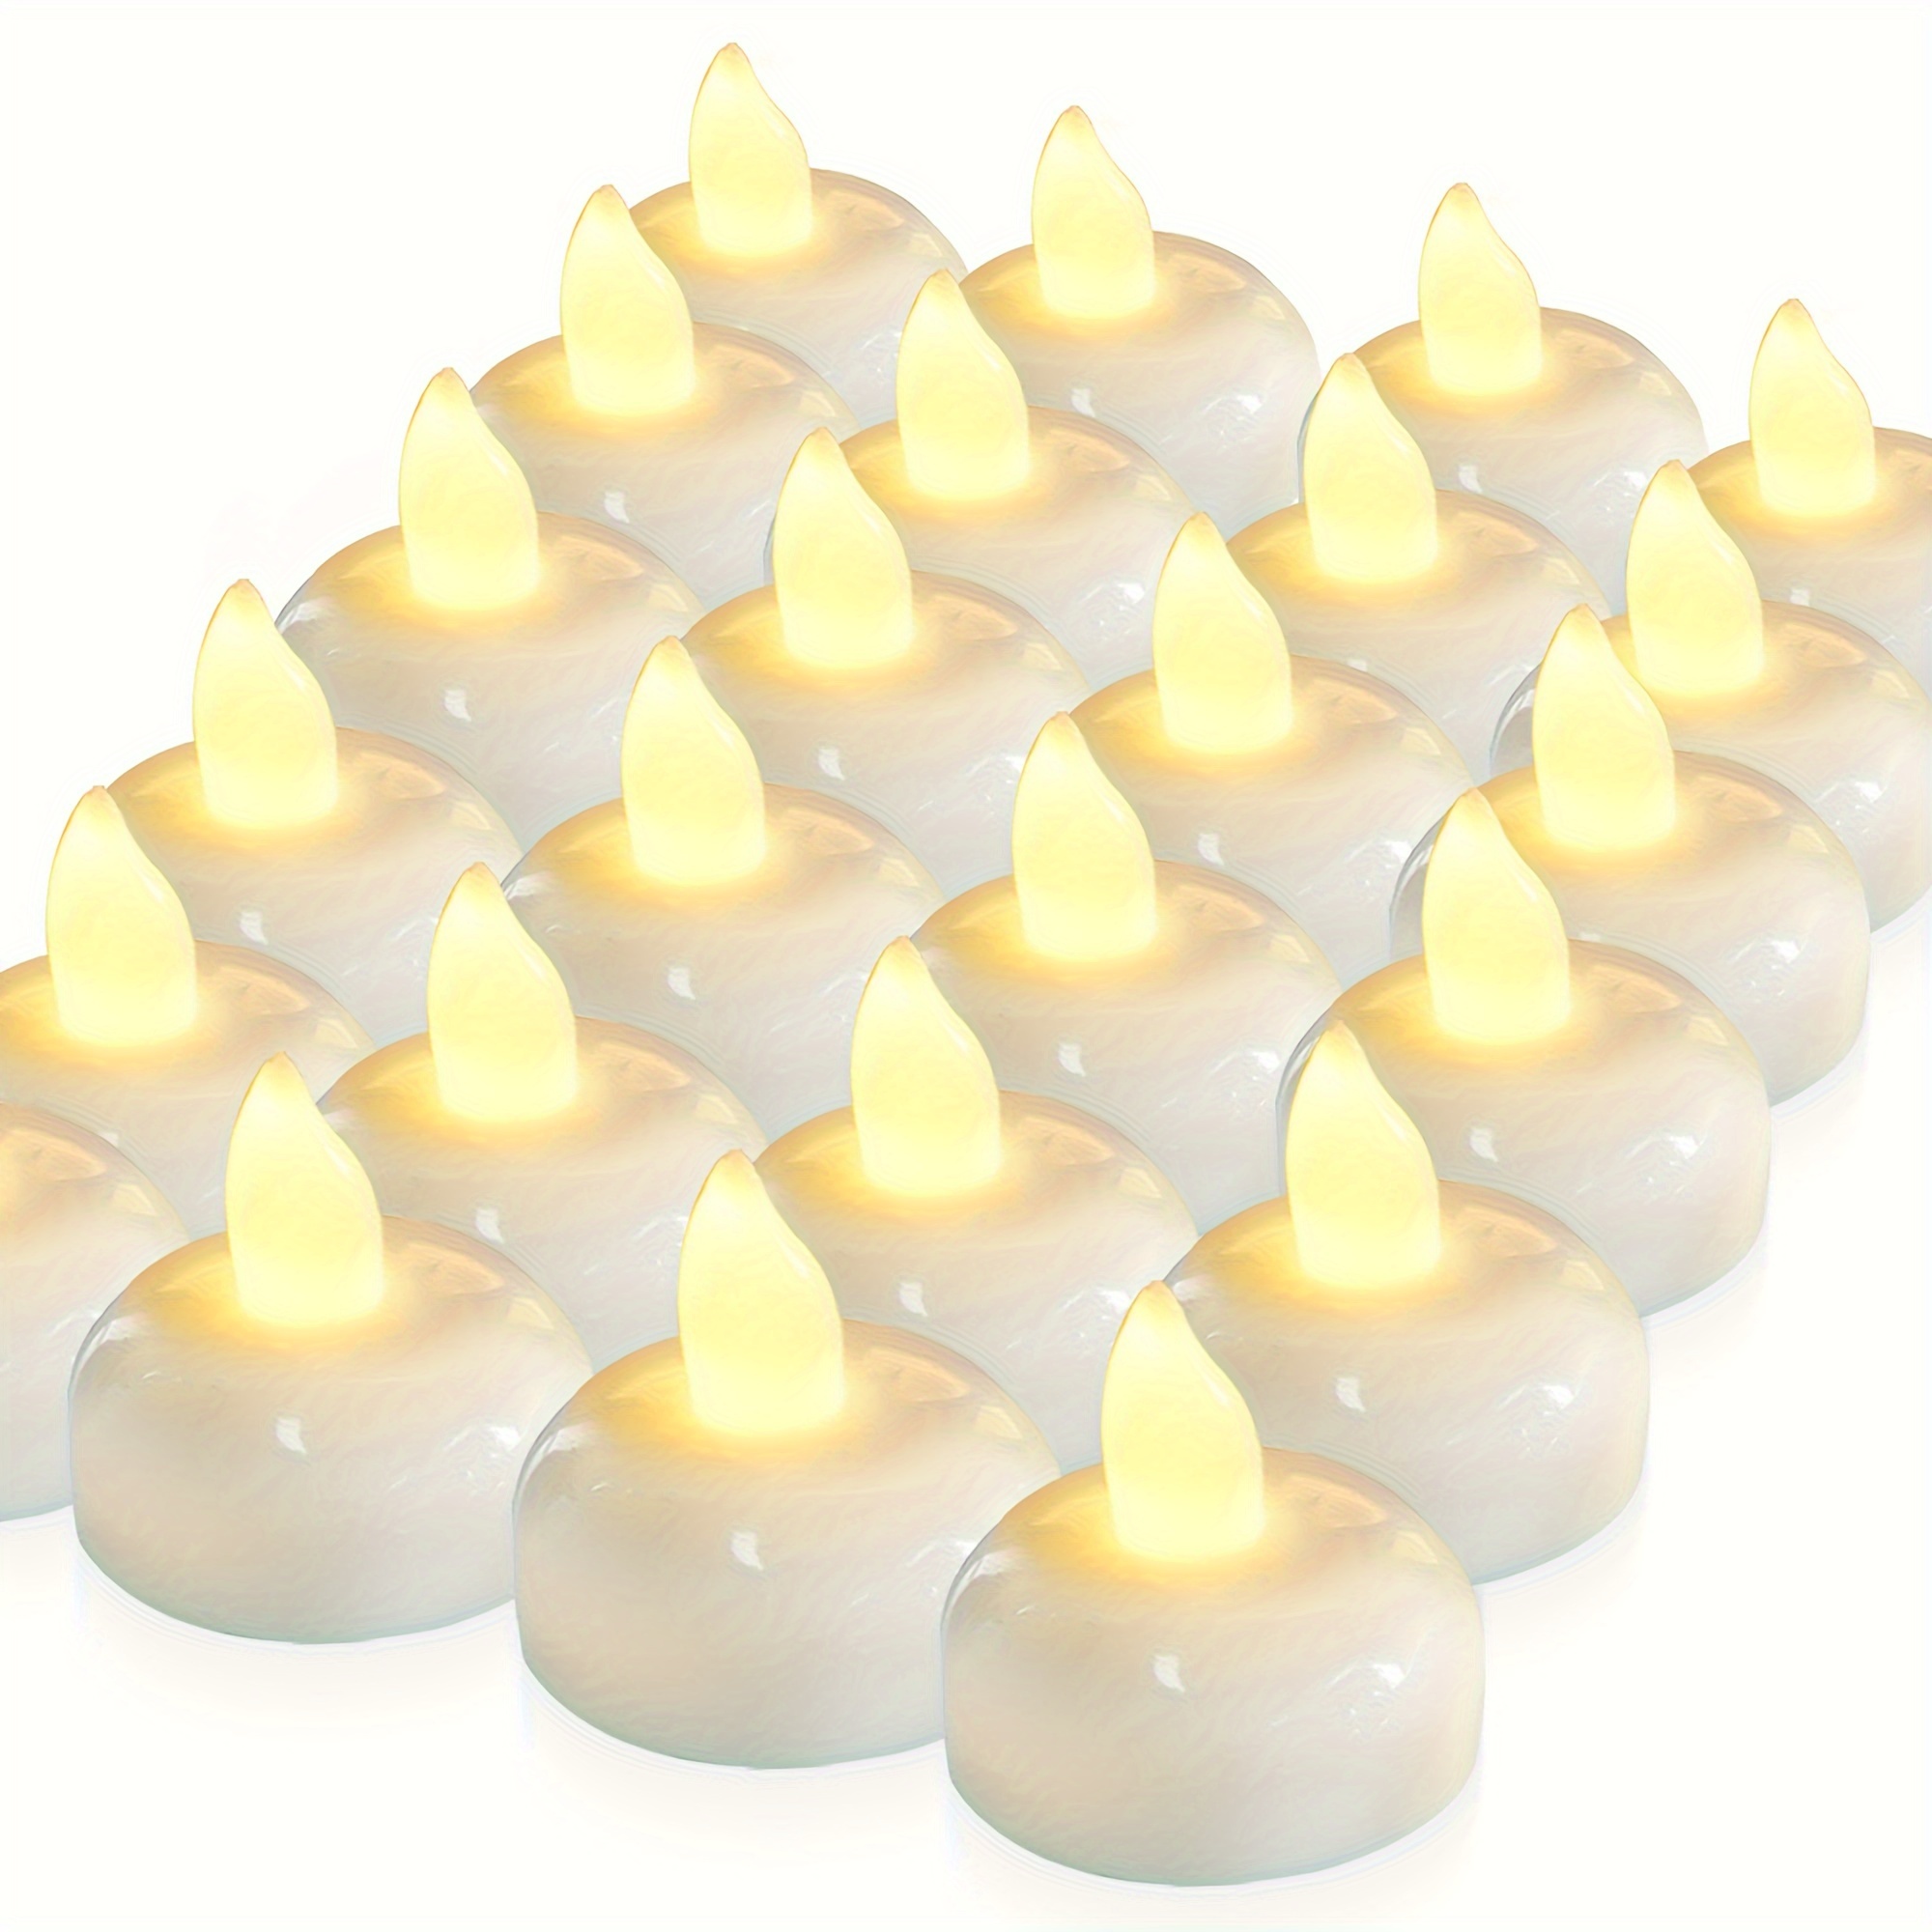 

24pcs Flameless Floating Tealights, Warm White Battery Flickering Led Tea Lights Candles - Wedding, Party, Centerpiece, Pool & Spa